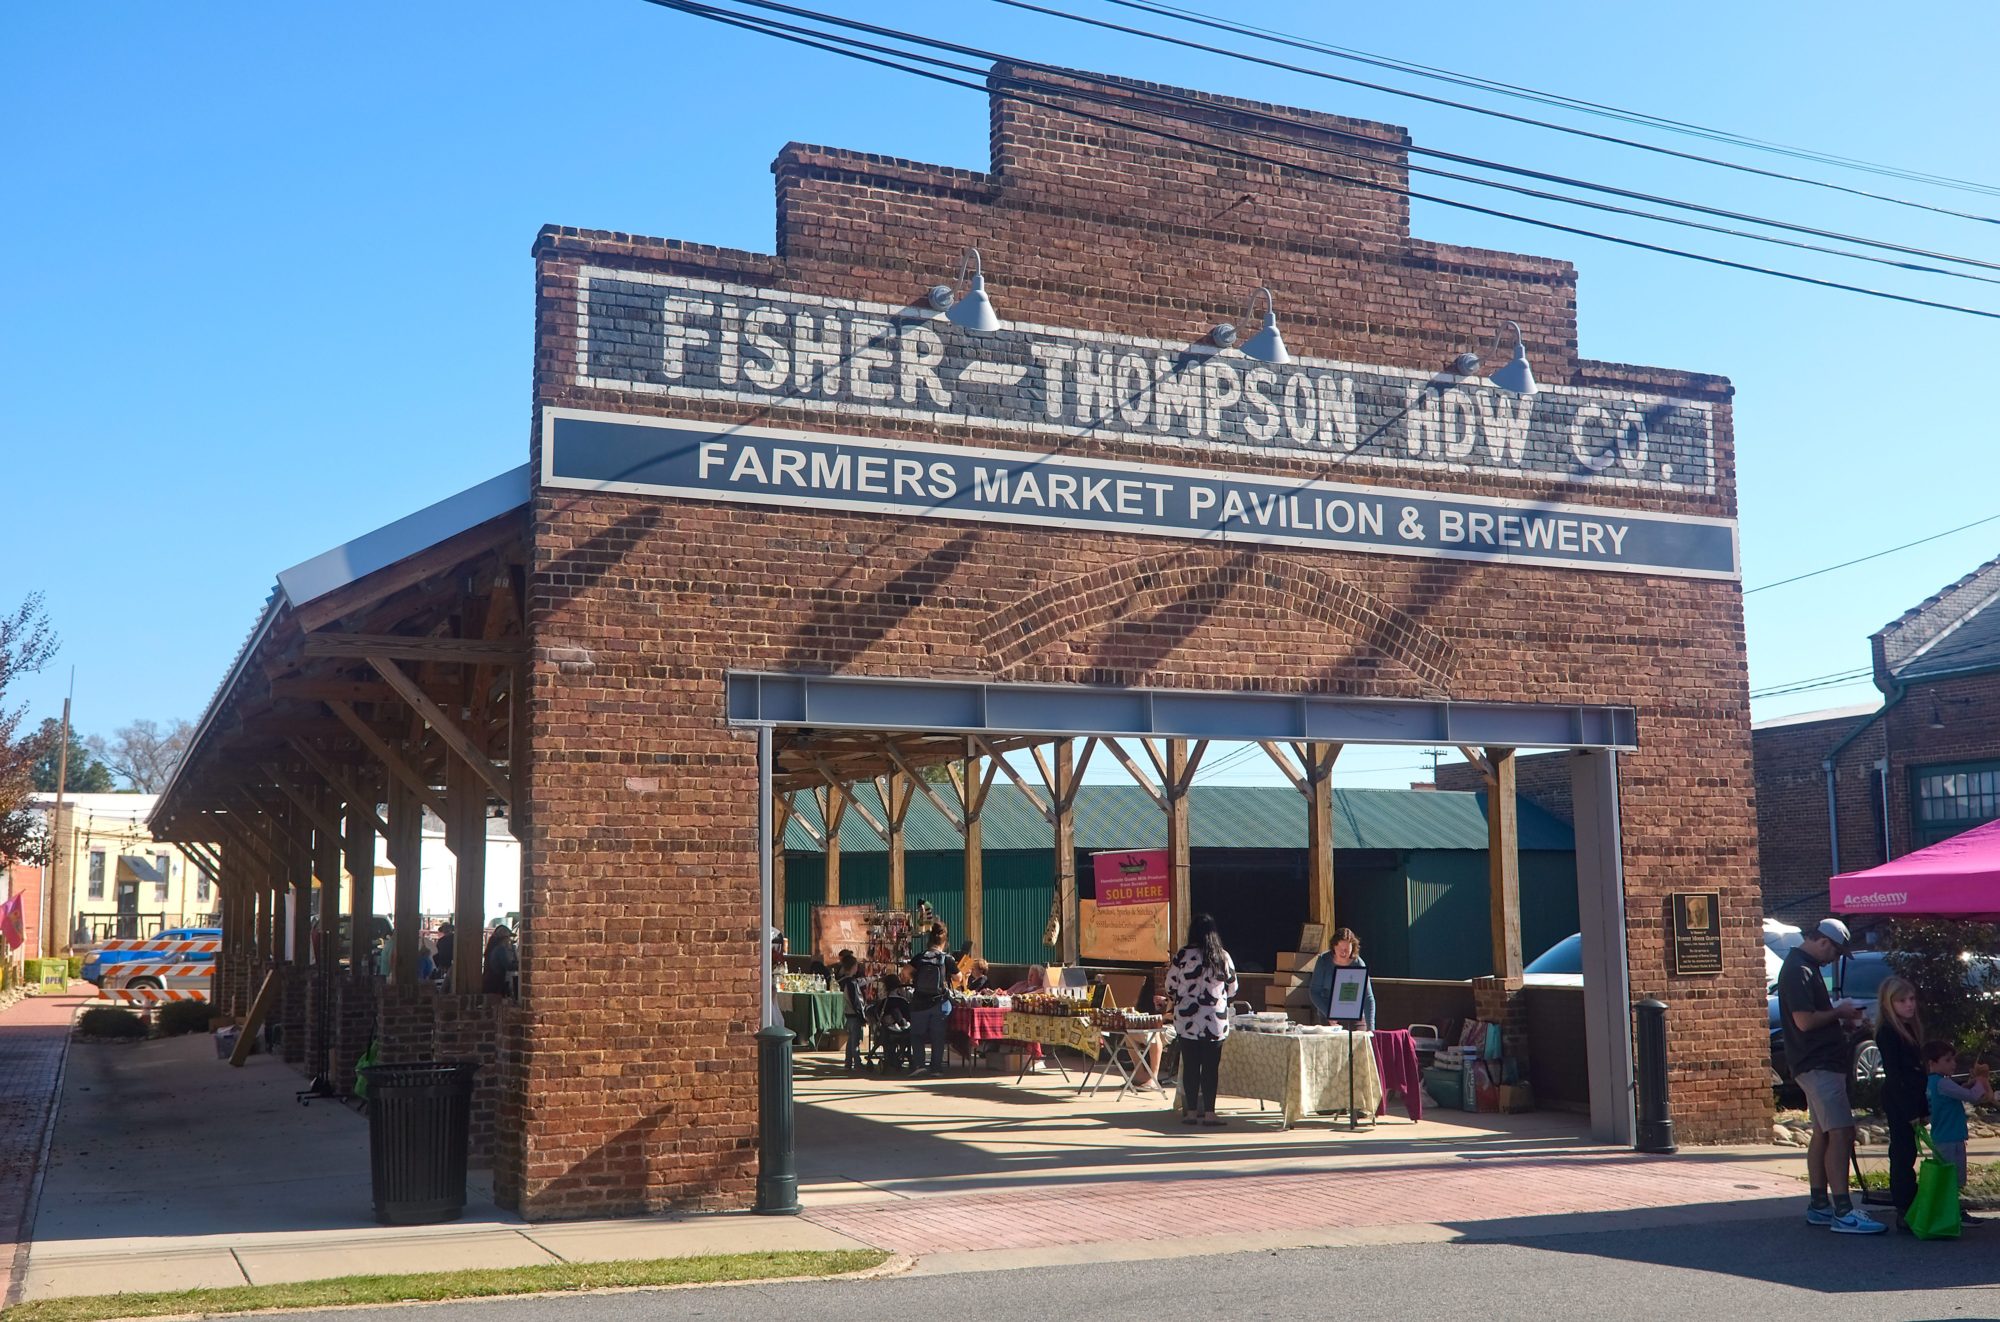 Exterior of the farmers market in downtown Salisbury, North Carolina, with shoppers and vendors